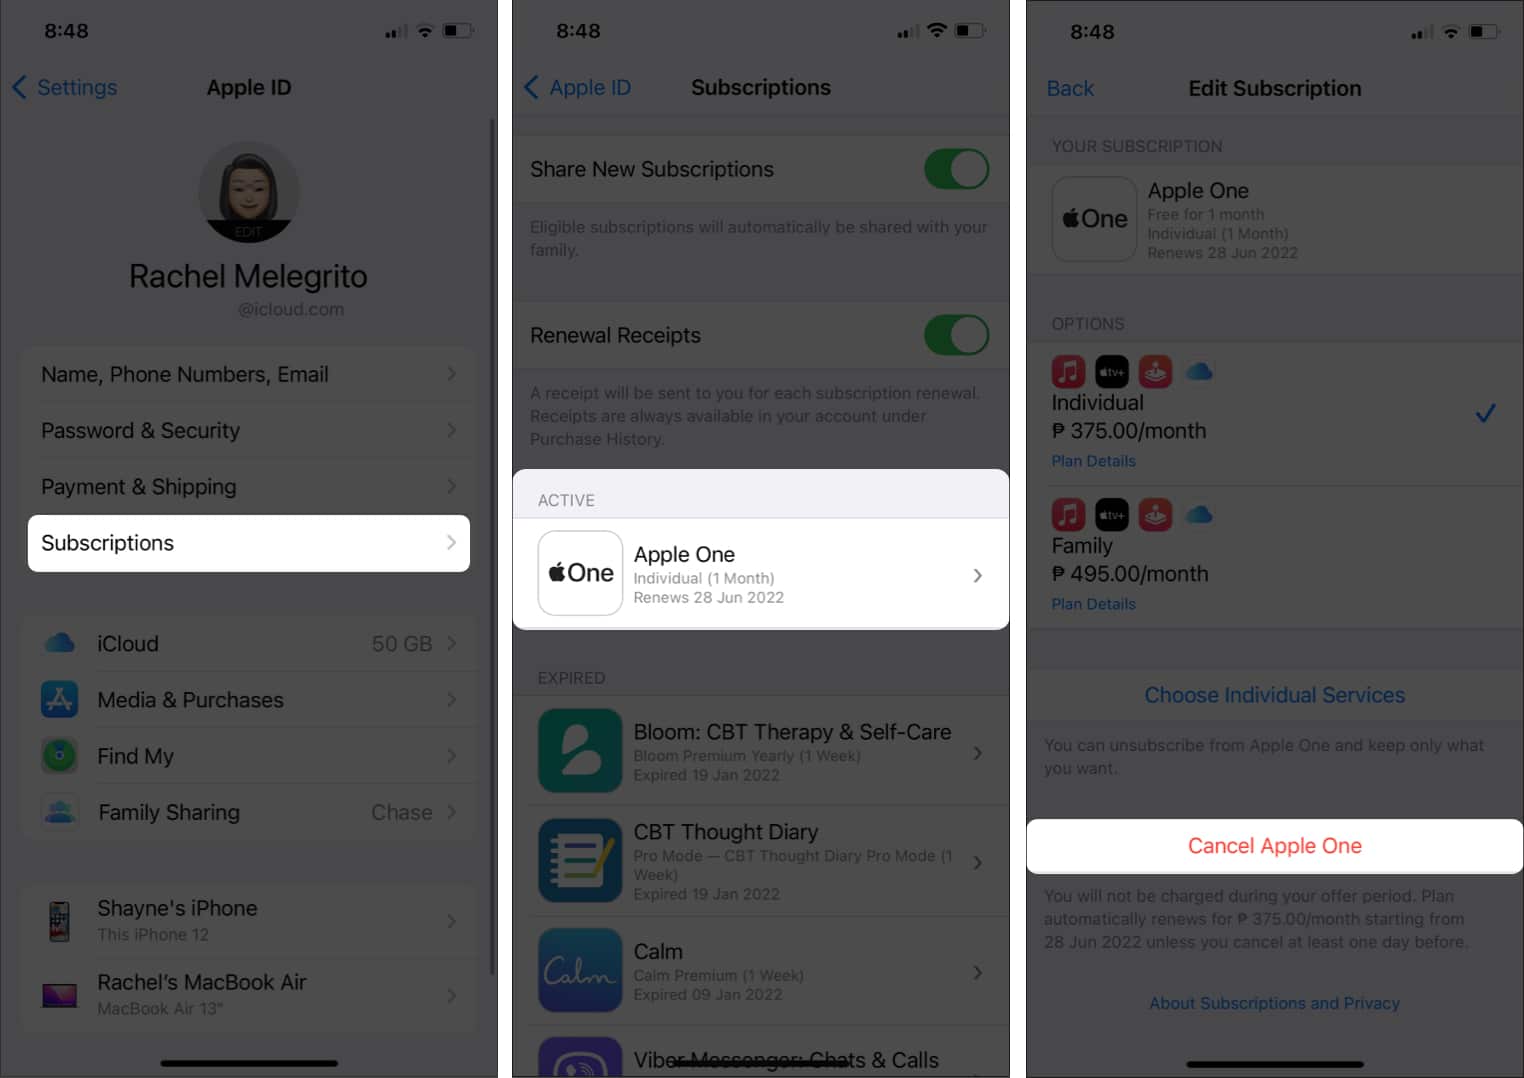 Cancel Apple subscriptions on your iPhone through Settings